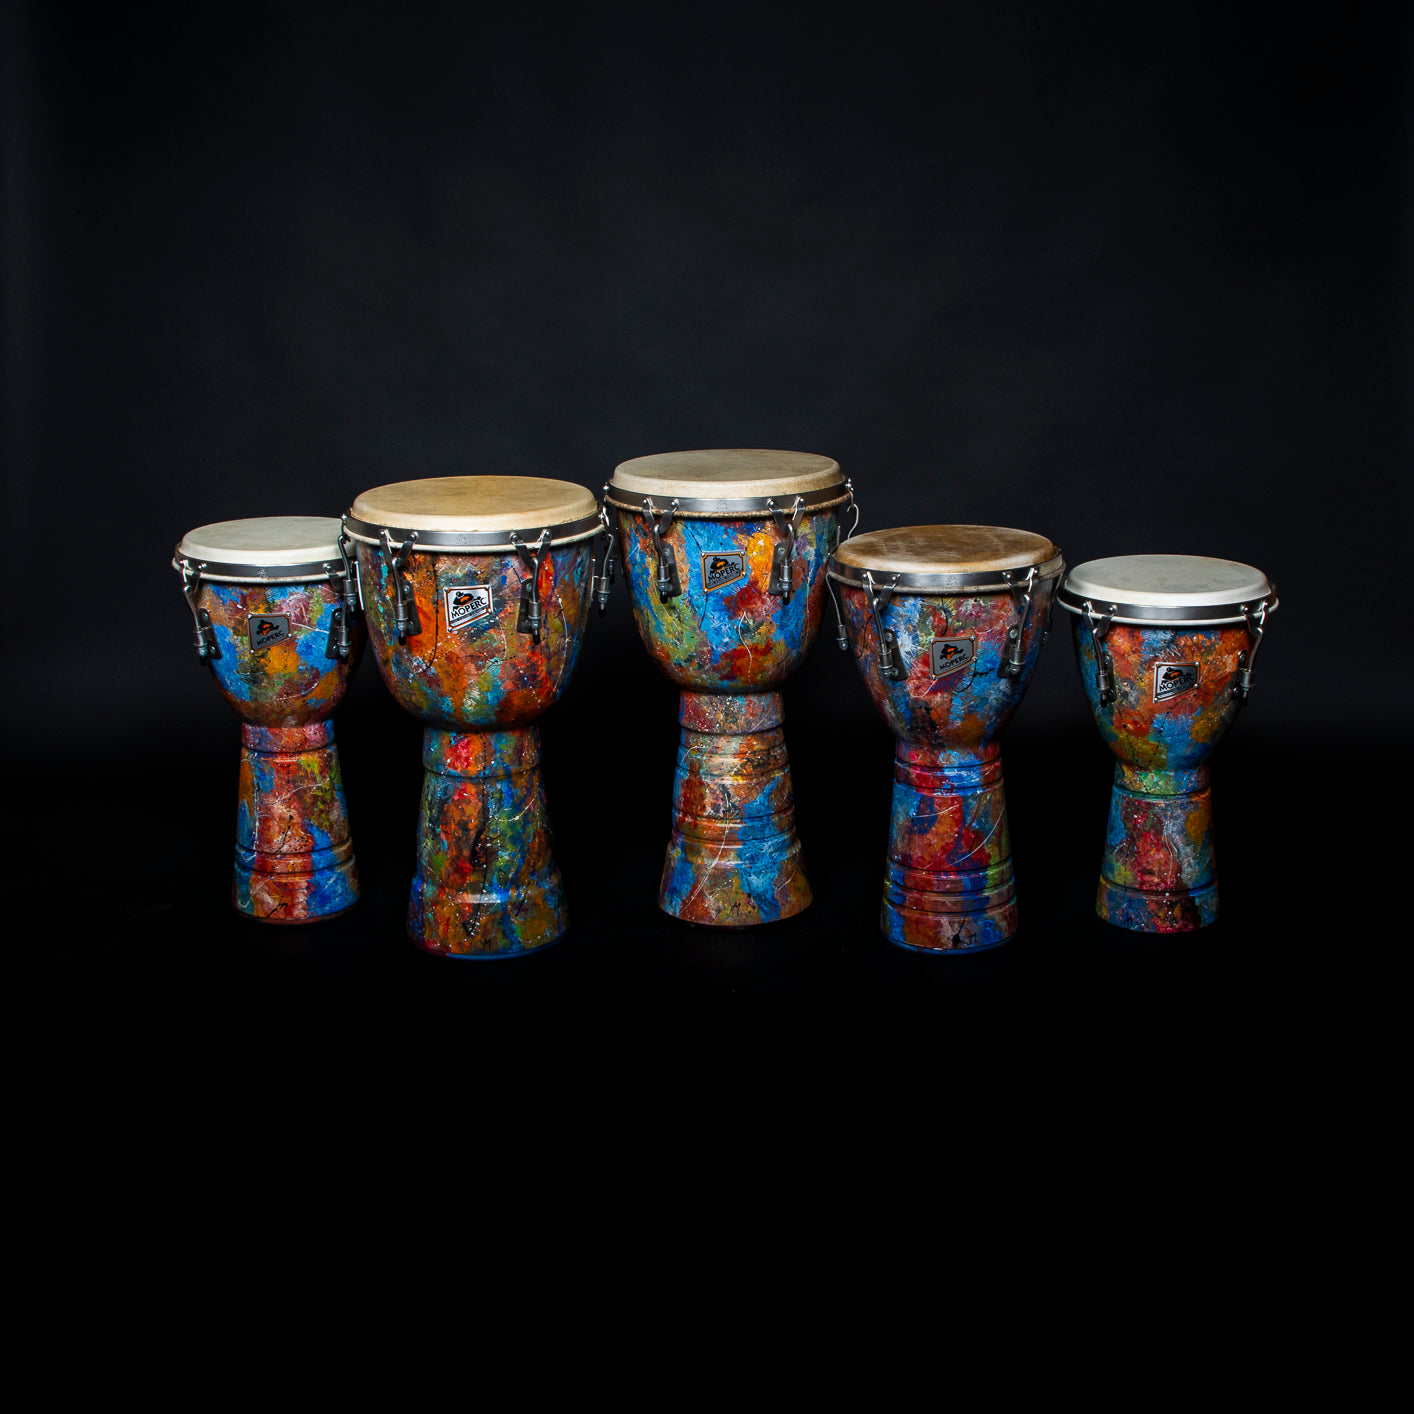 5 Moperc ash djembe collection with Andres hand painting